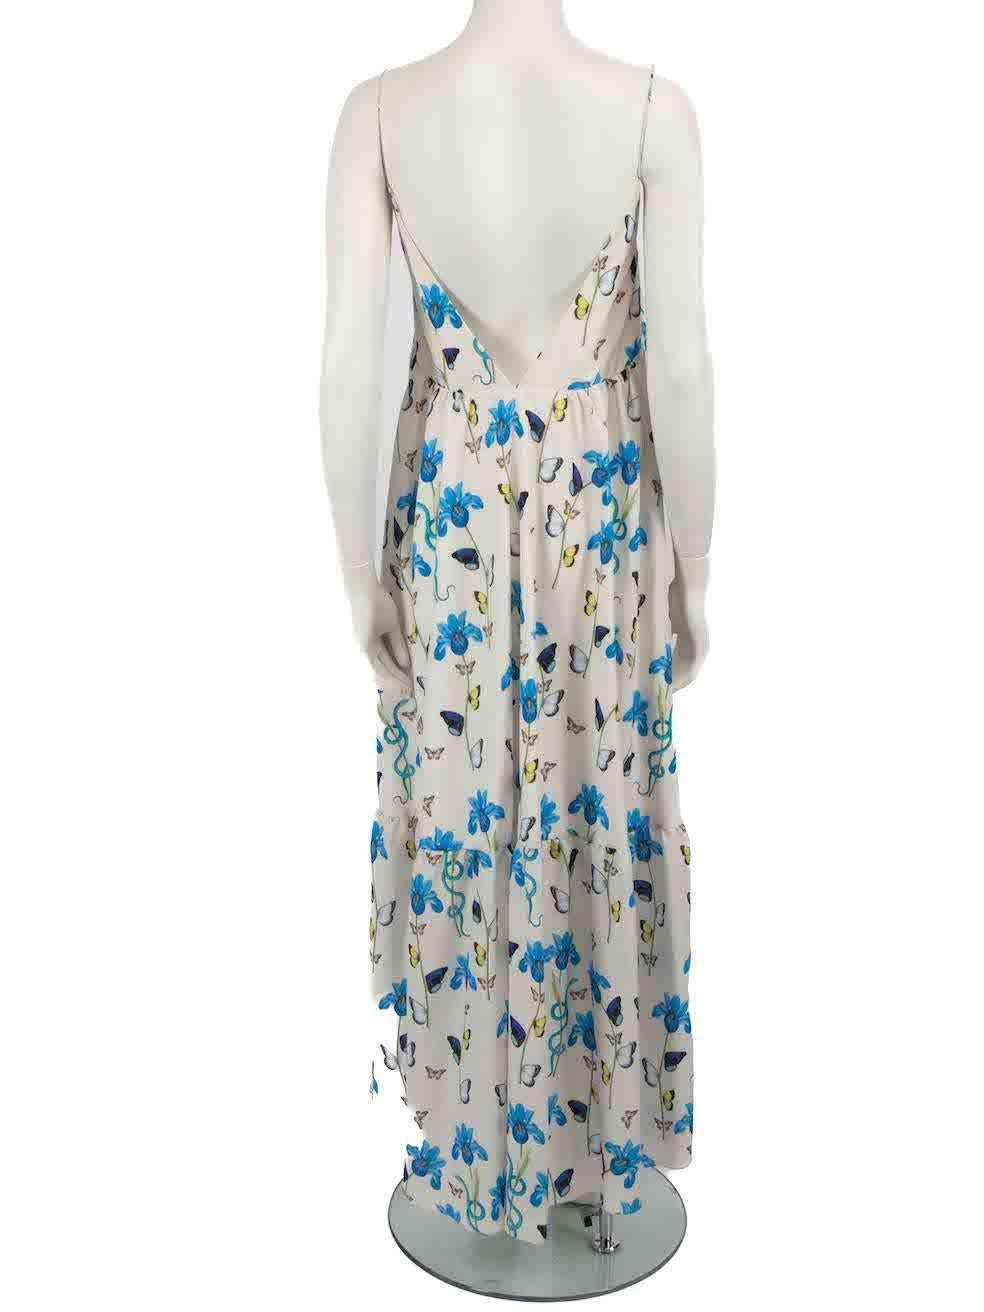 Borgo De Nor White Butterfly Floral Midi Dress Size S In Excellent Condition For Sale In London, GB